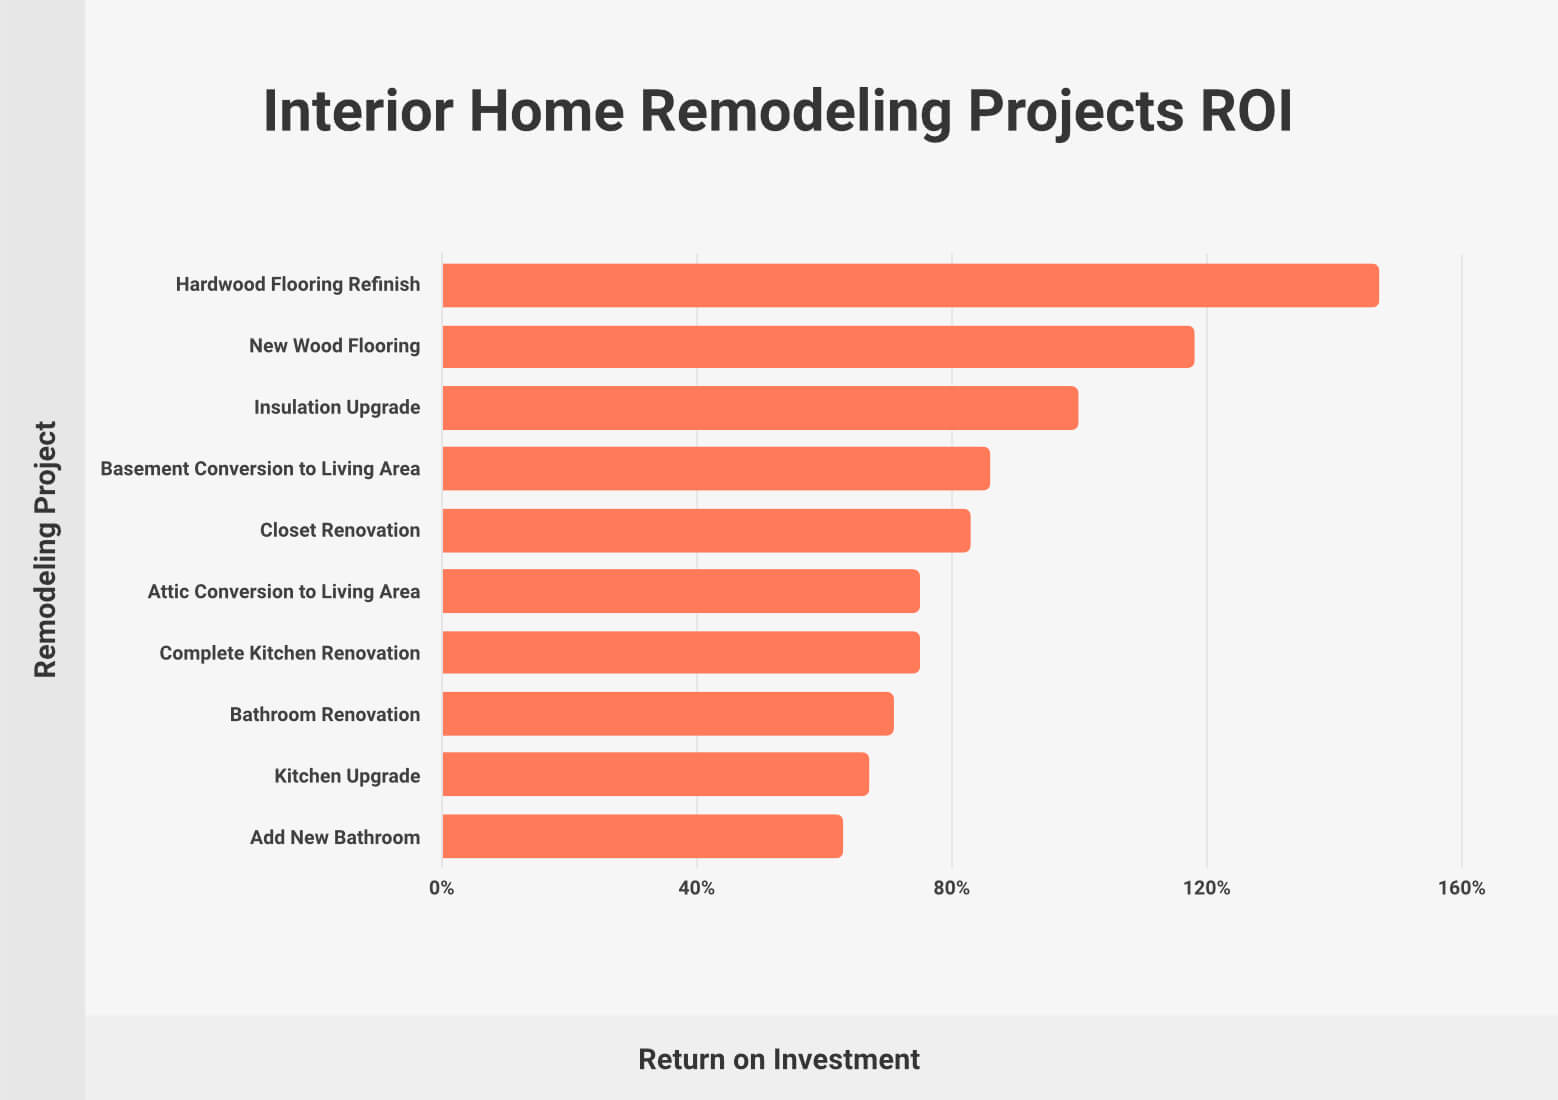 Interior Home Remodeling Projects ROI